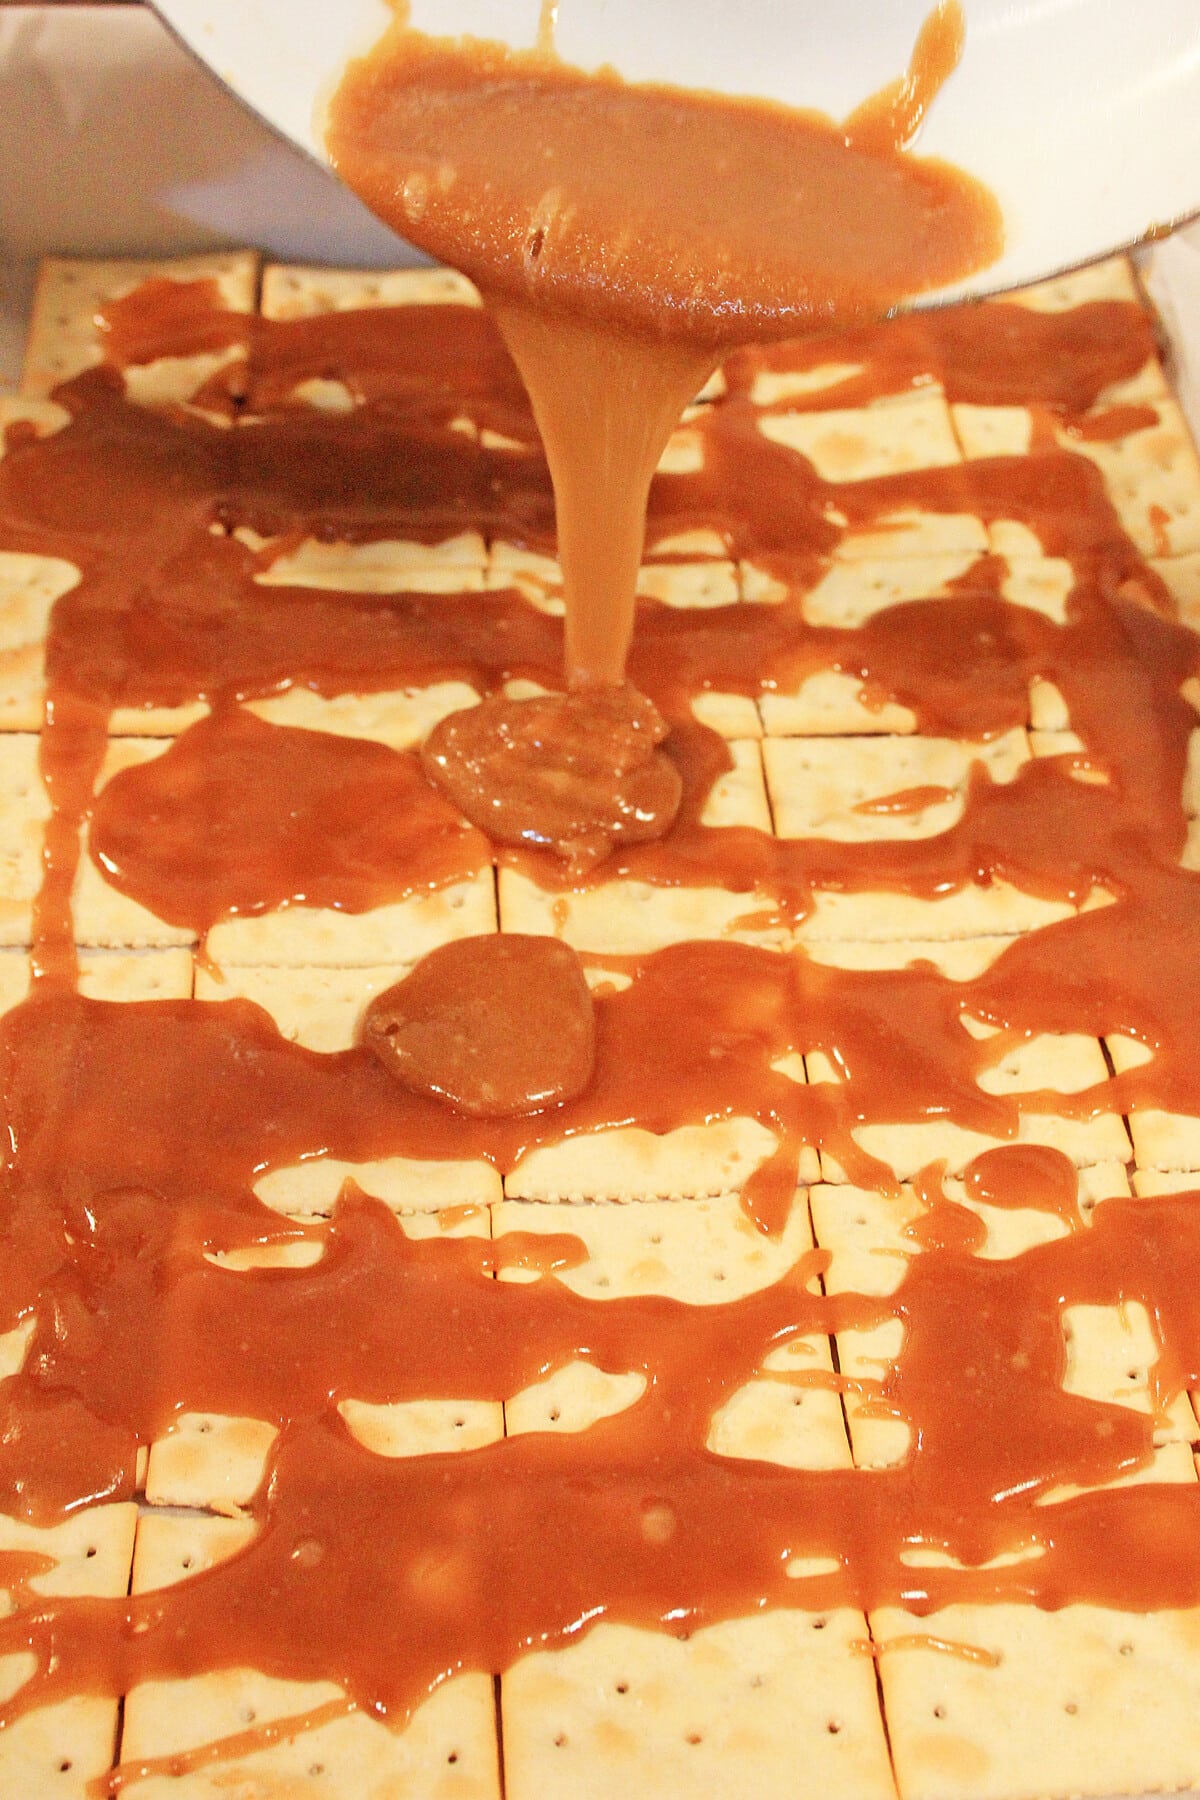 Covering saltine crackers with caramel mixture